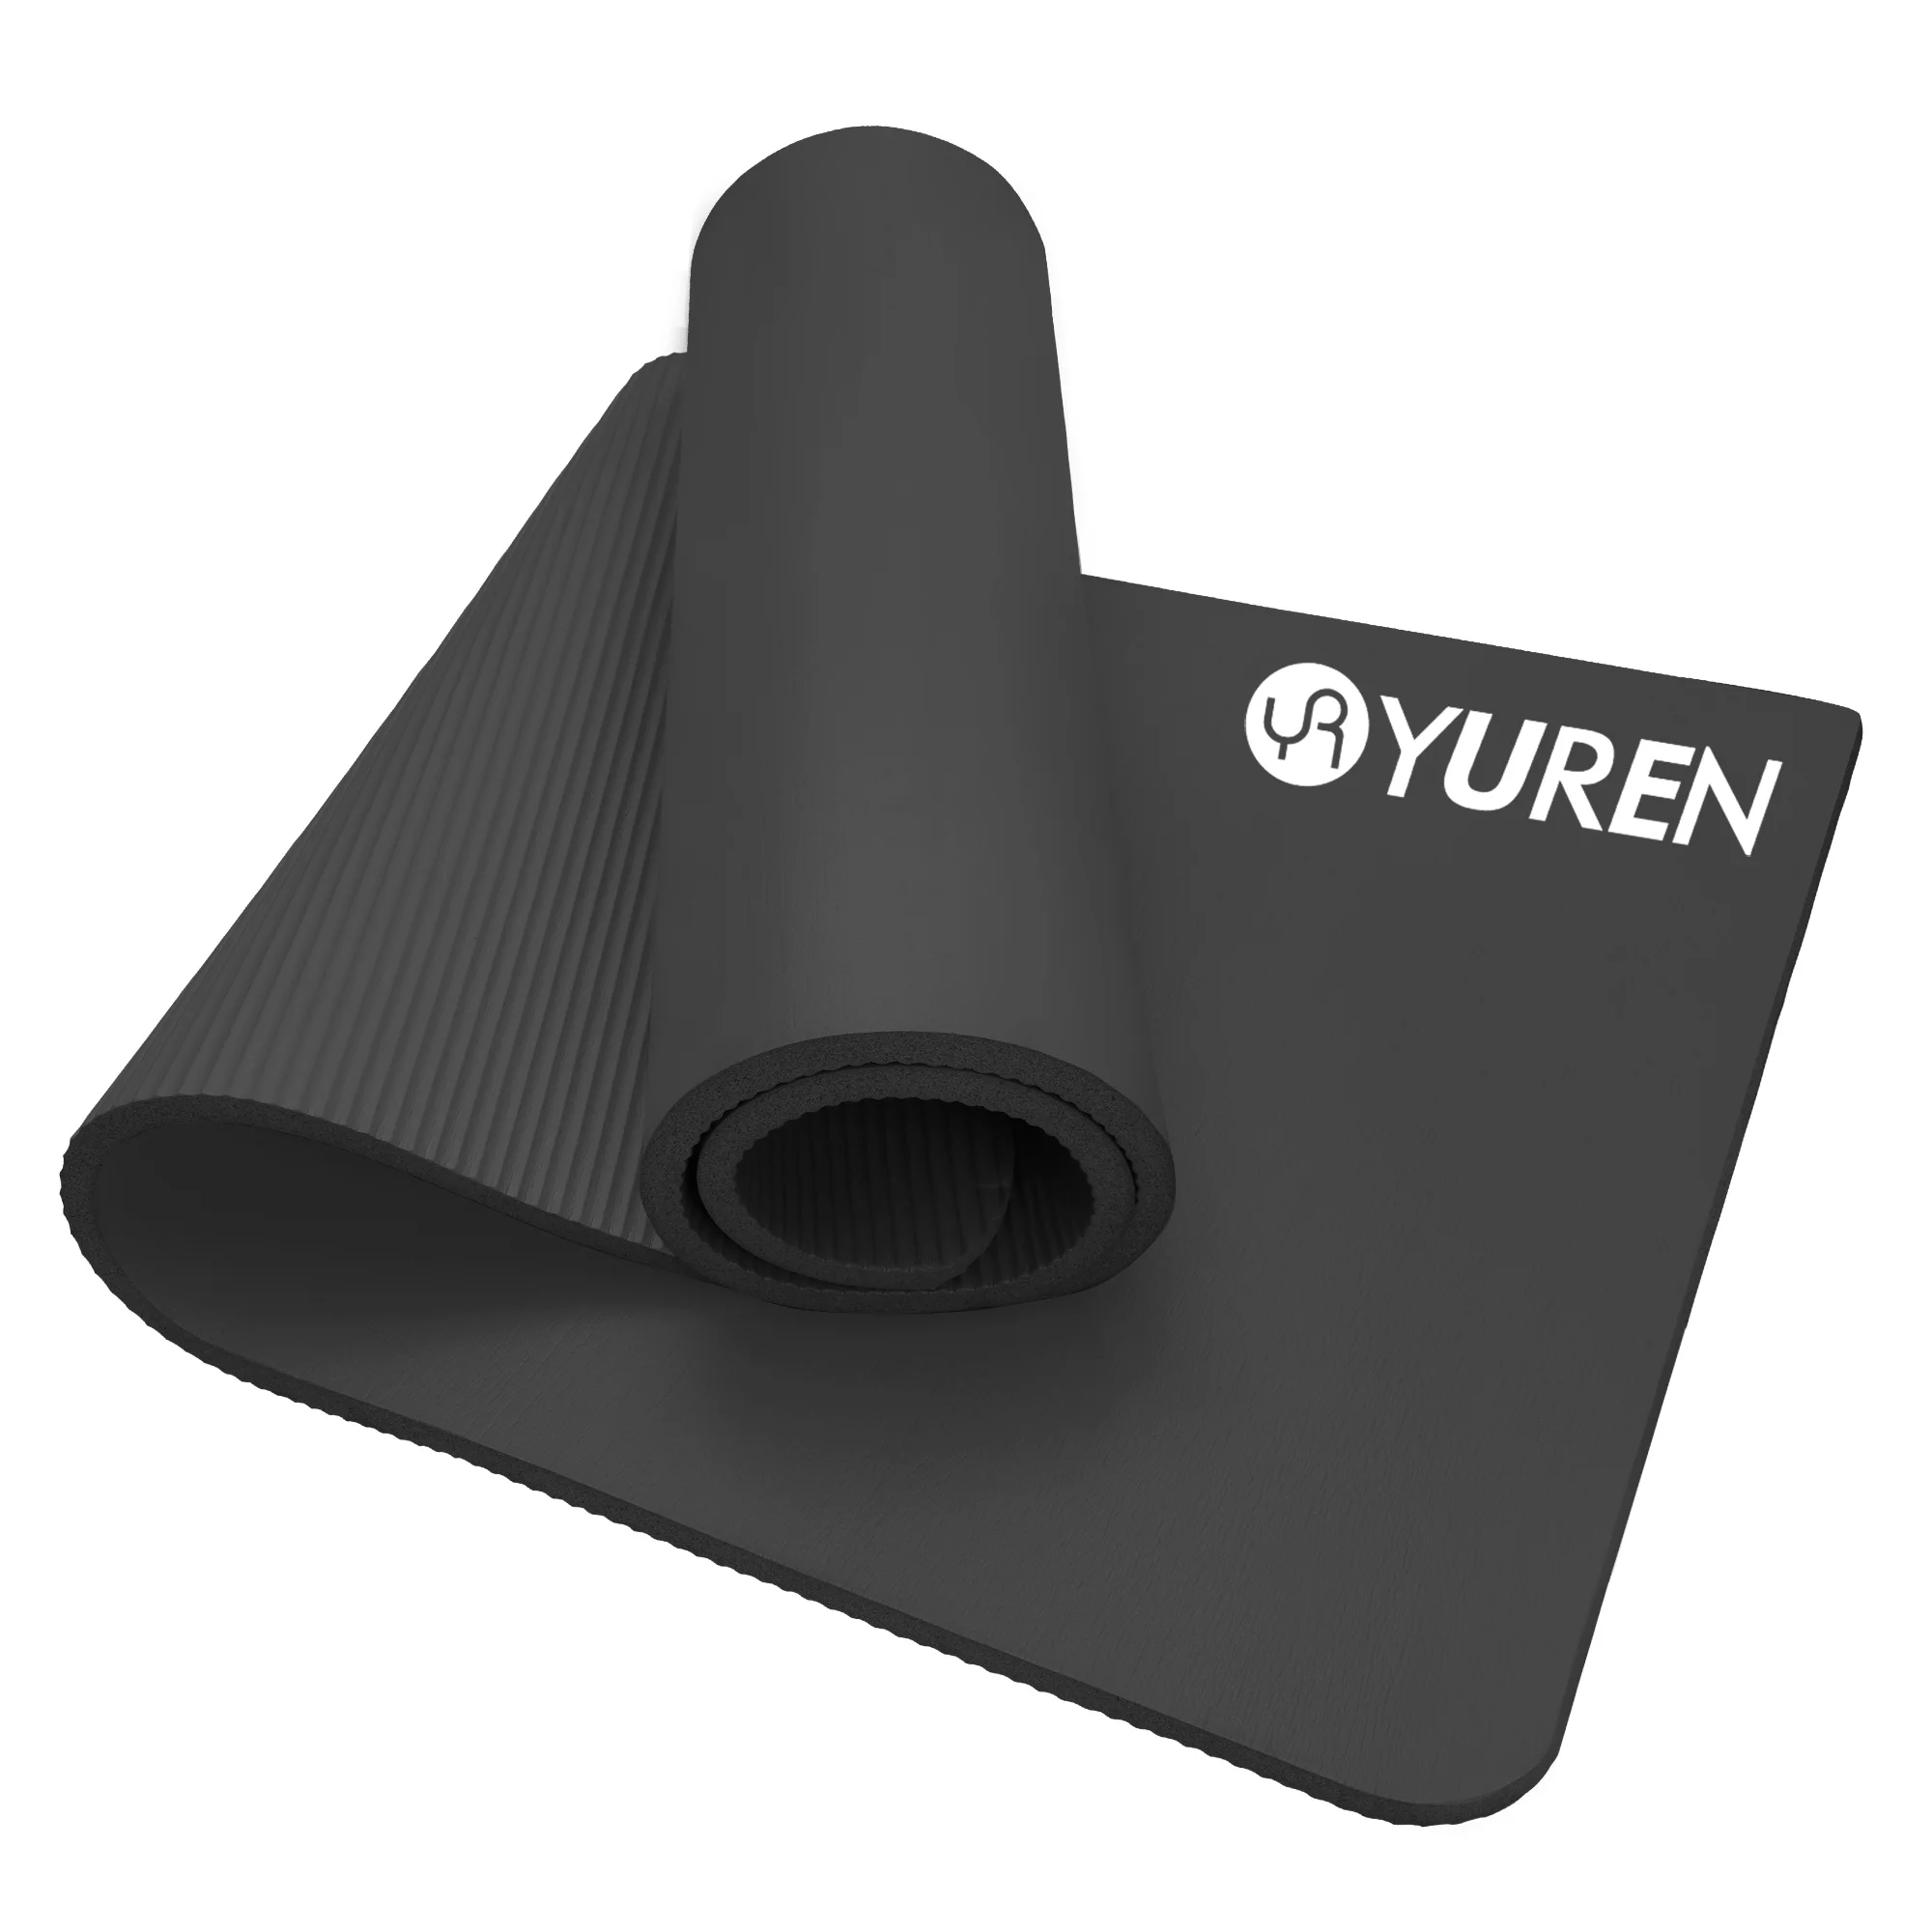 

YUREN NBR Material 15mm Thick Yoga Mat Fitness Exercise Mats Non-slip For Lean Legs Cardio Pilates Home Gym Workout Cushion